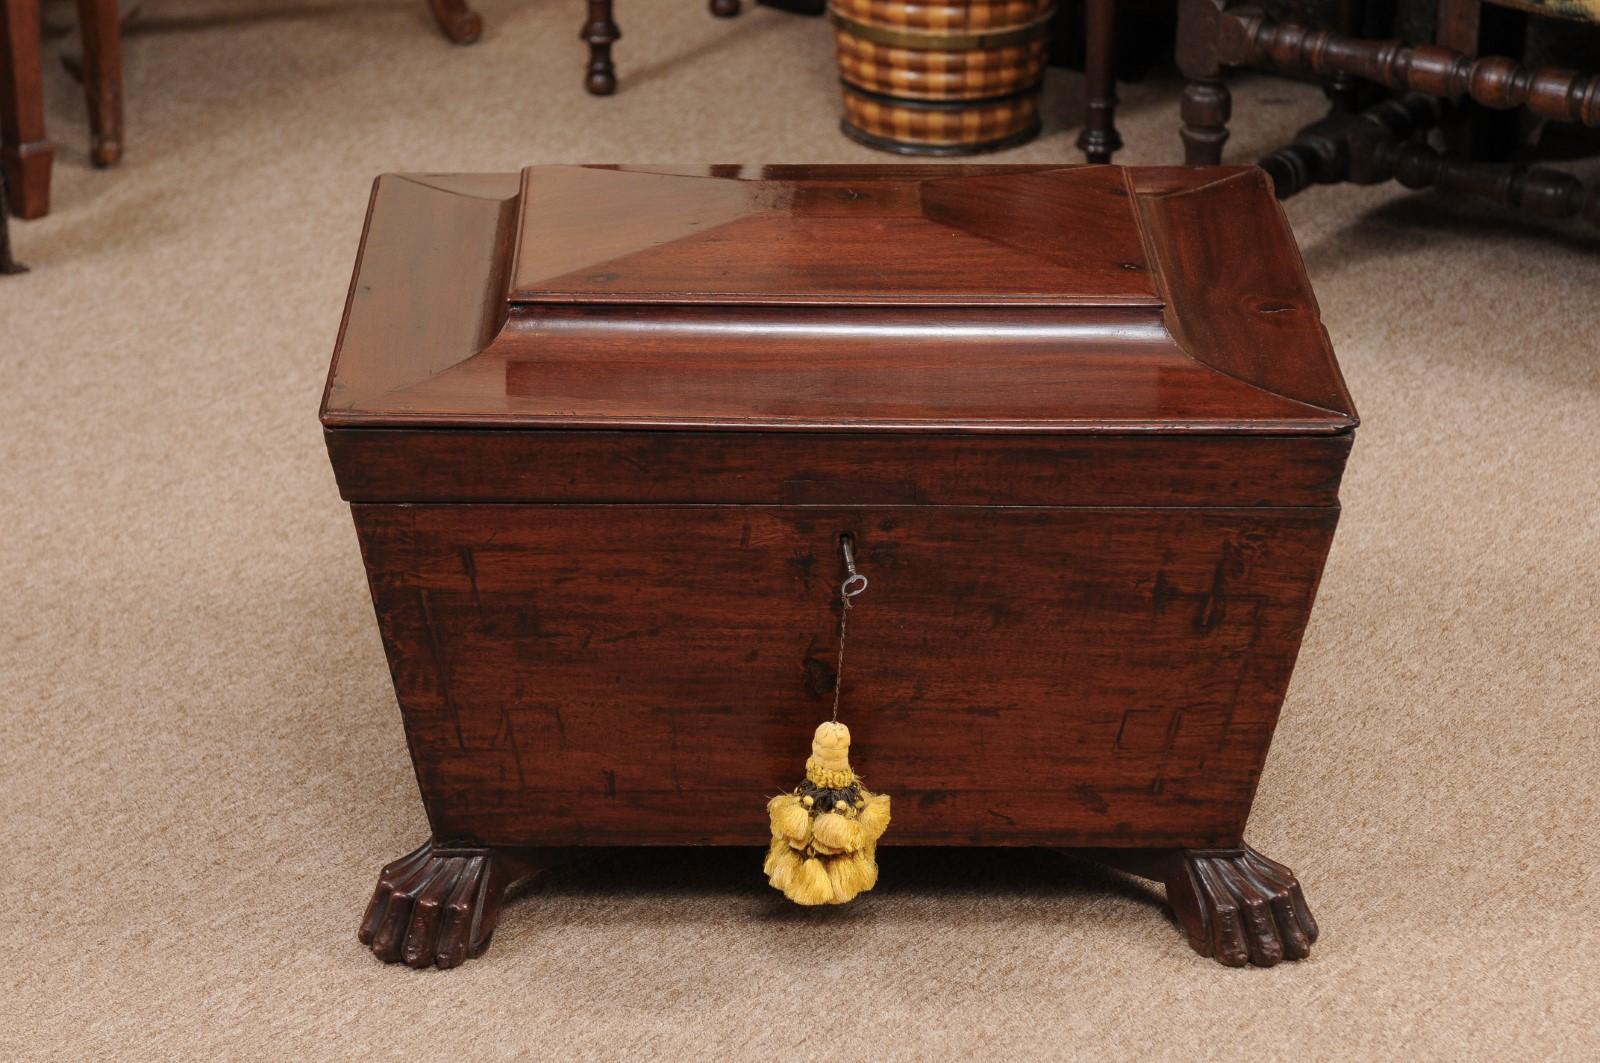 19th Century English Regency Sarcophagus-Form Cellarette in Mahogany For Sale 4